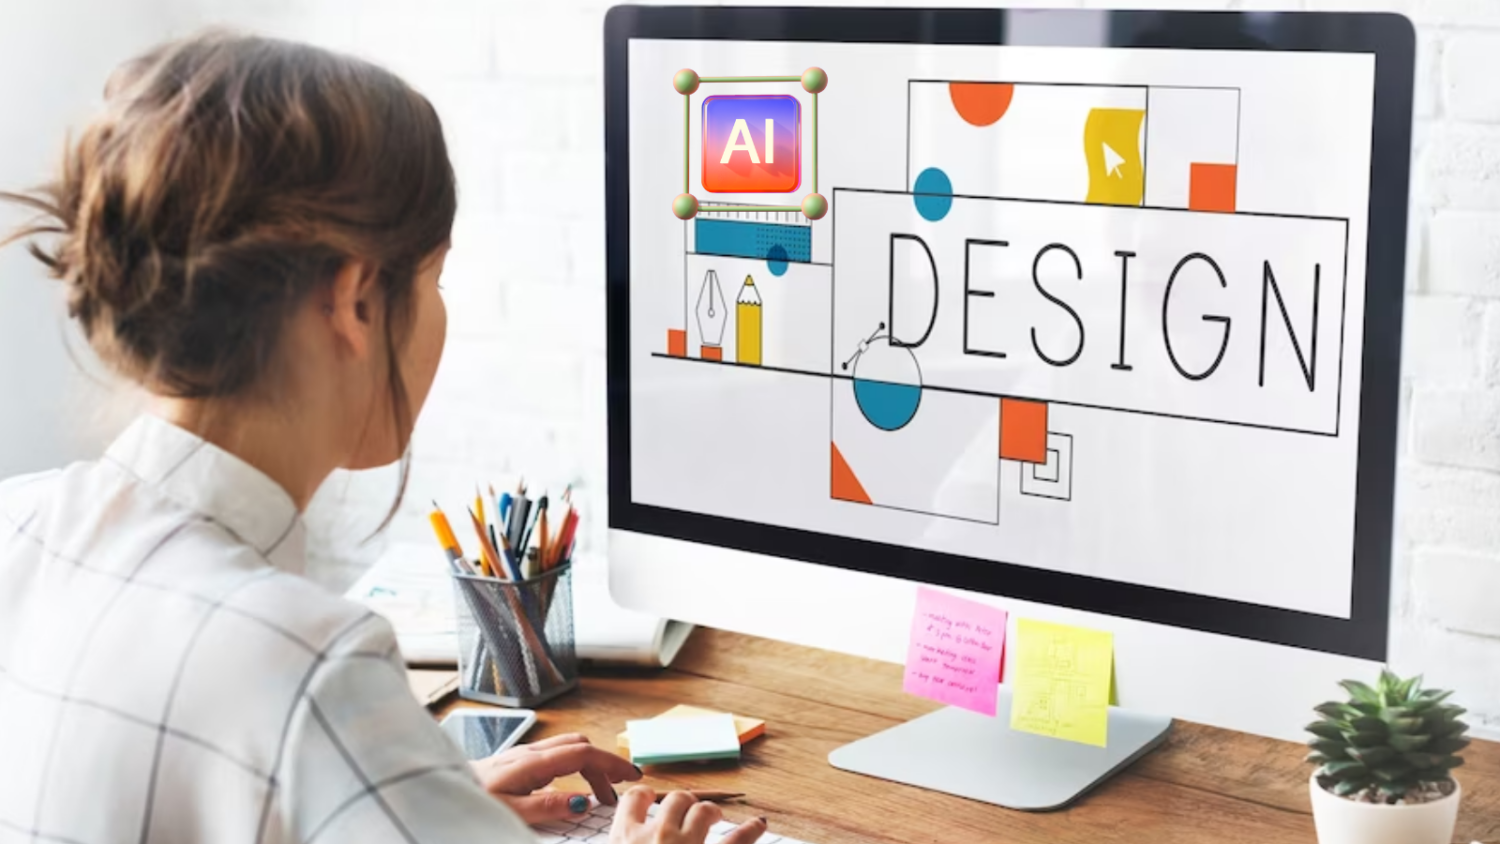 What-are-the-Benefits-of-an-AI-Design-Tool-for-Designer